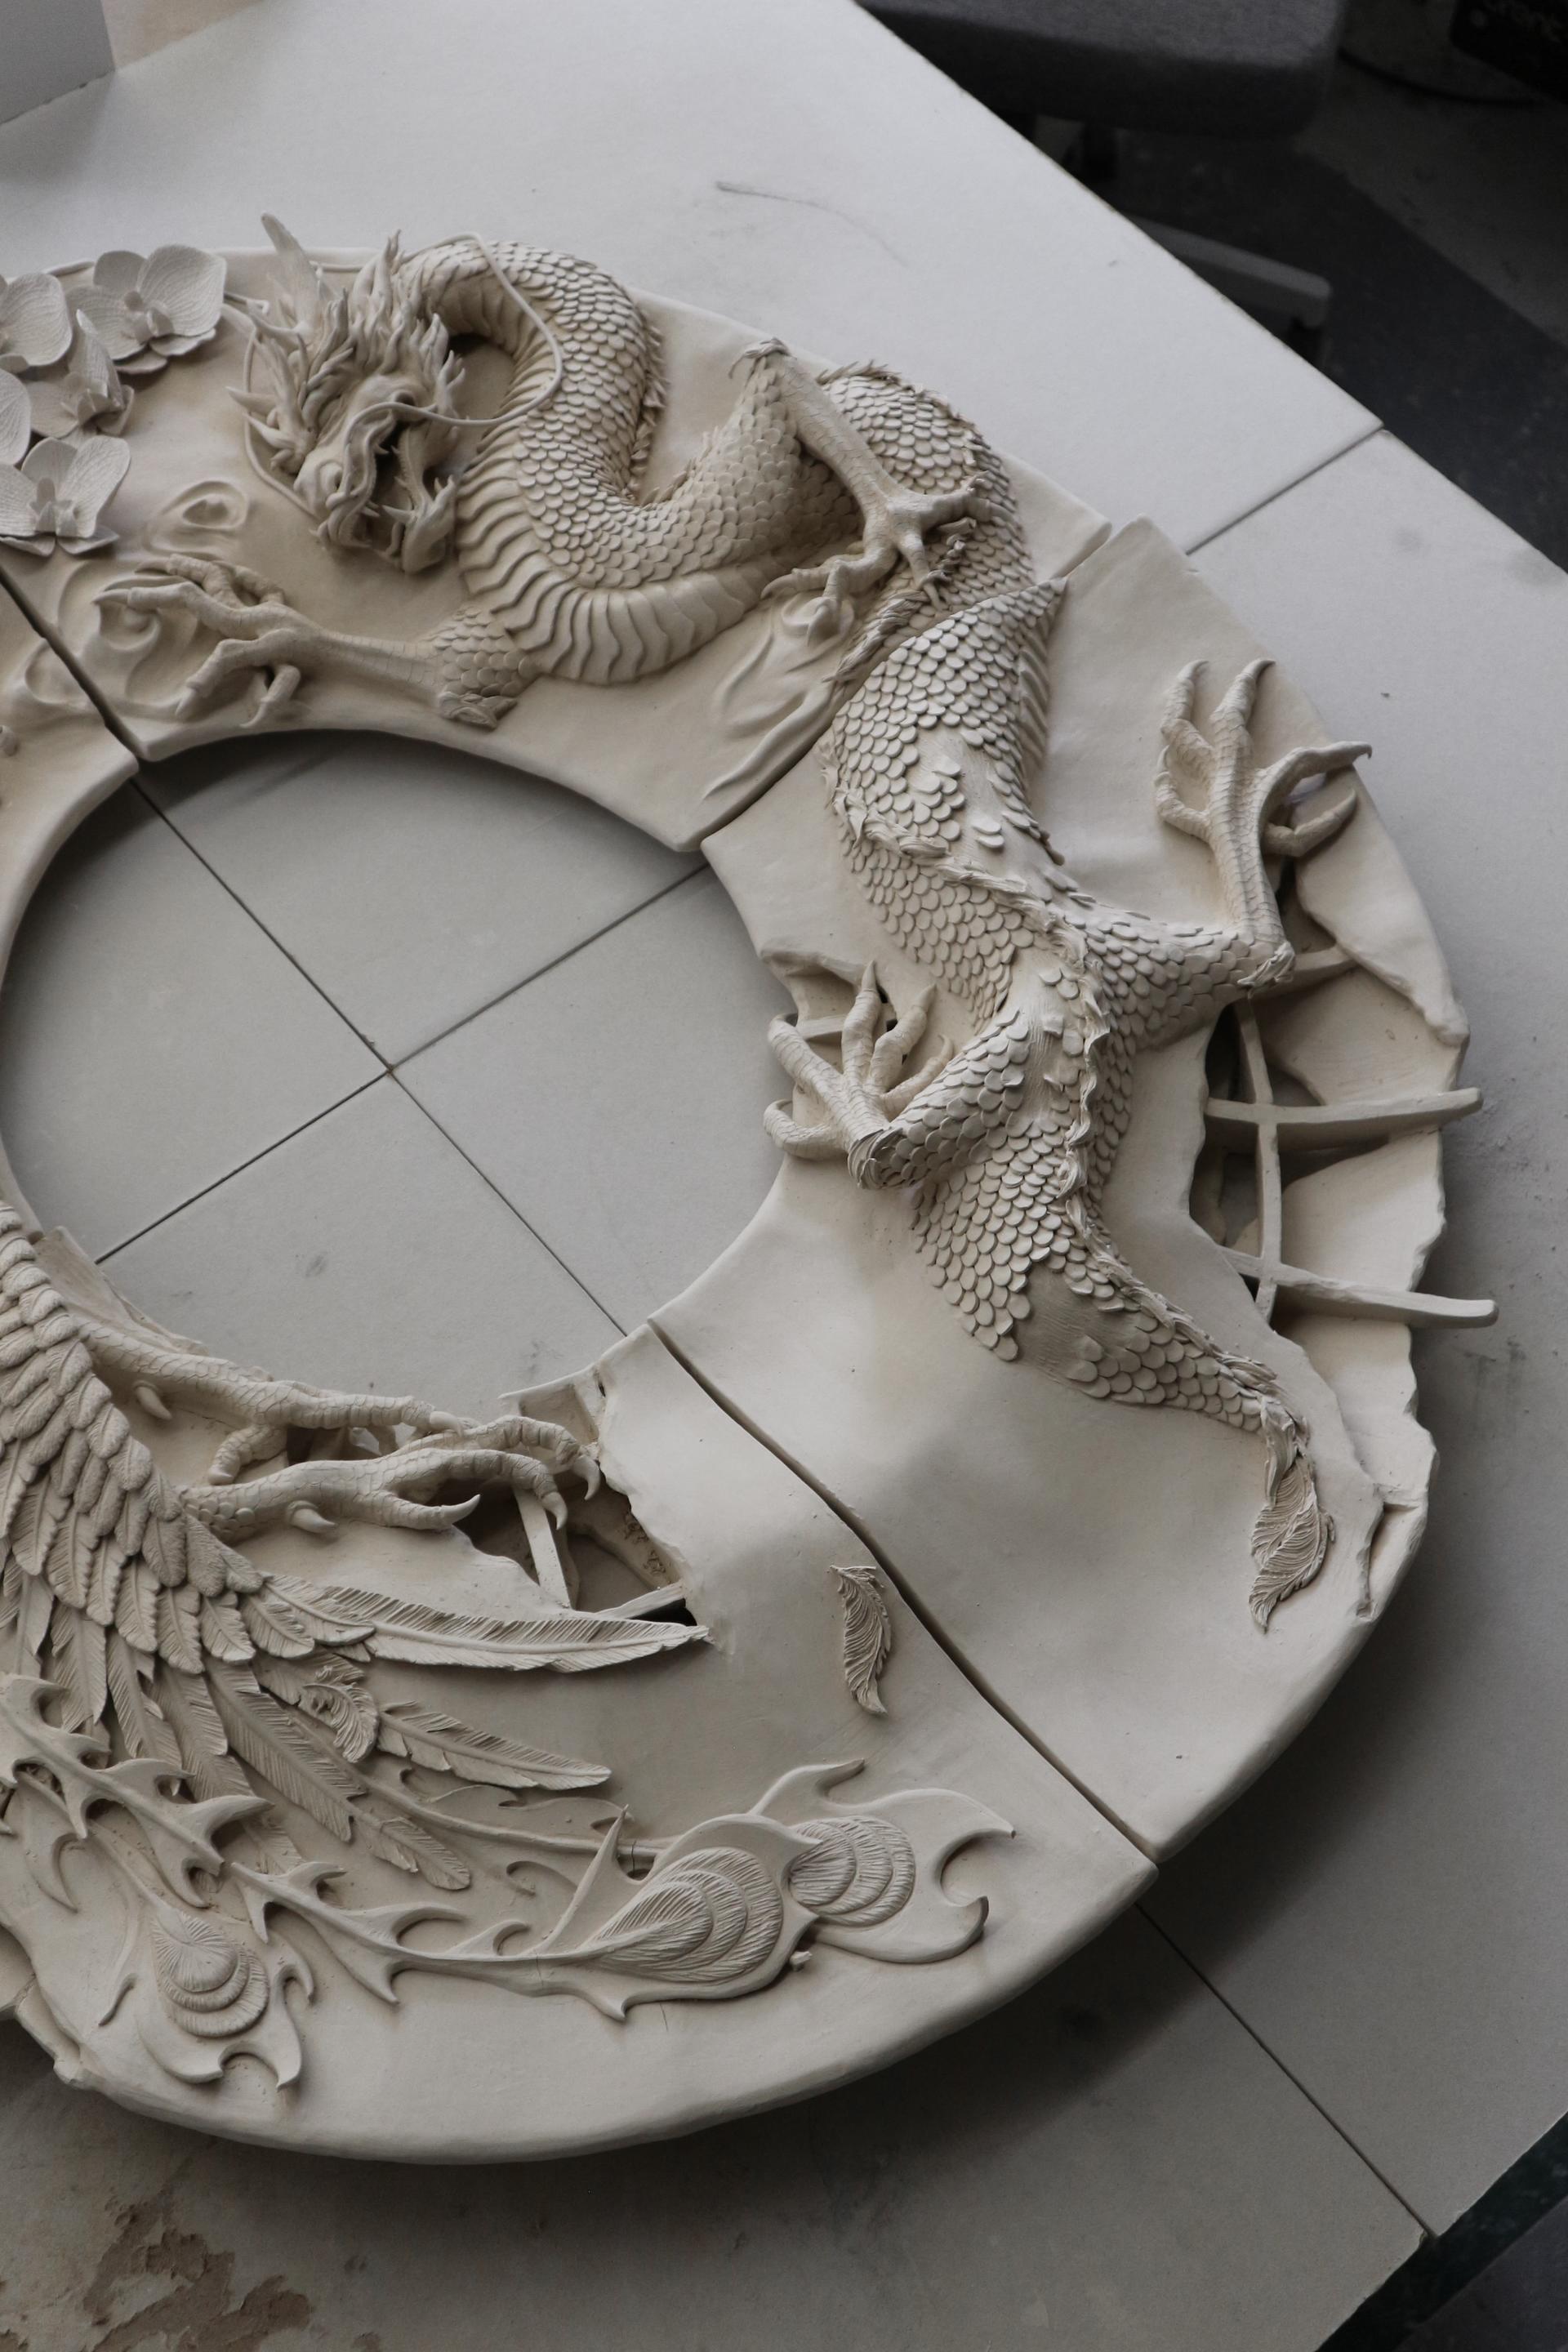 Large ceramic mirror frame with a detailed dragon, phoenix and orchid sculptures on the surface. 